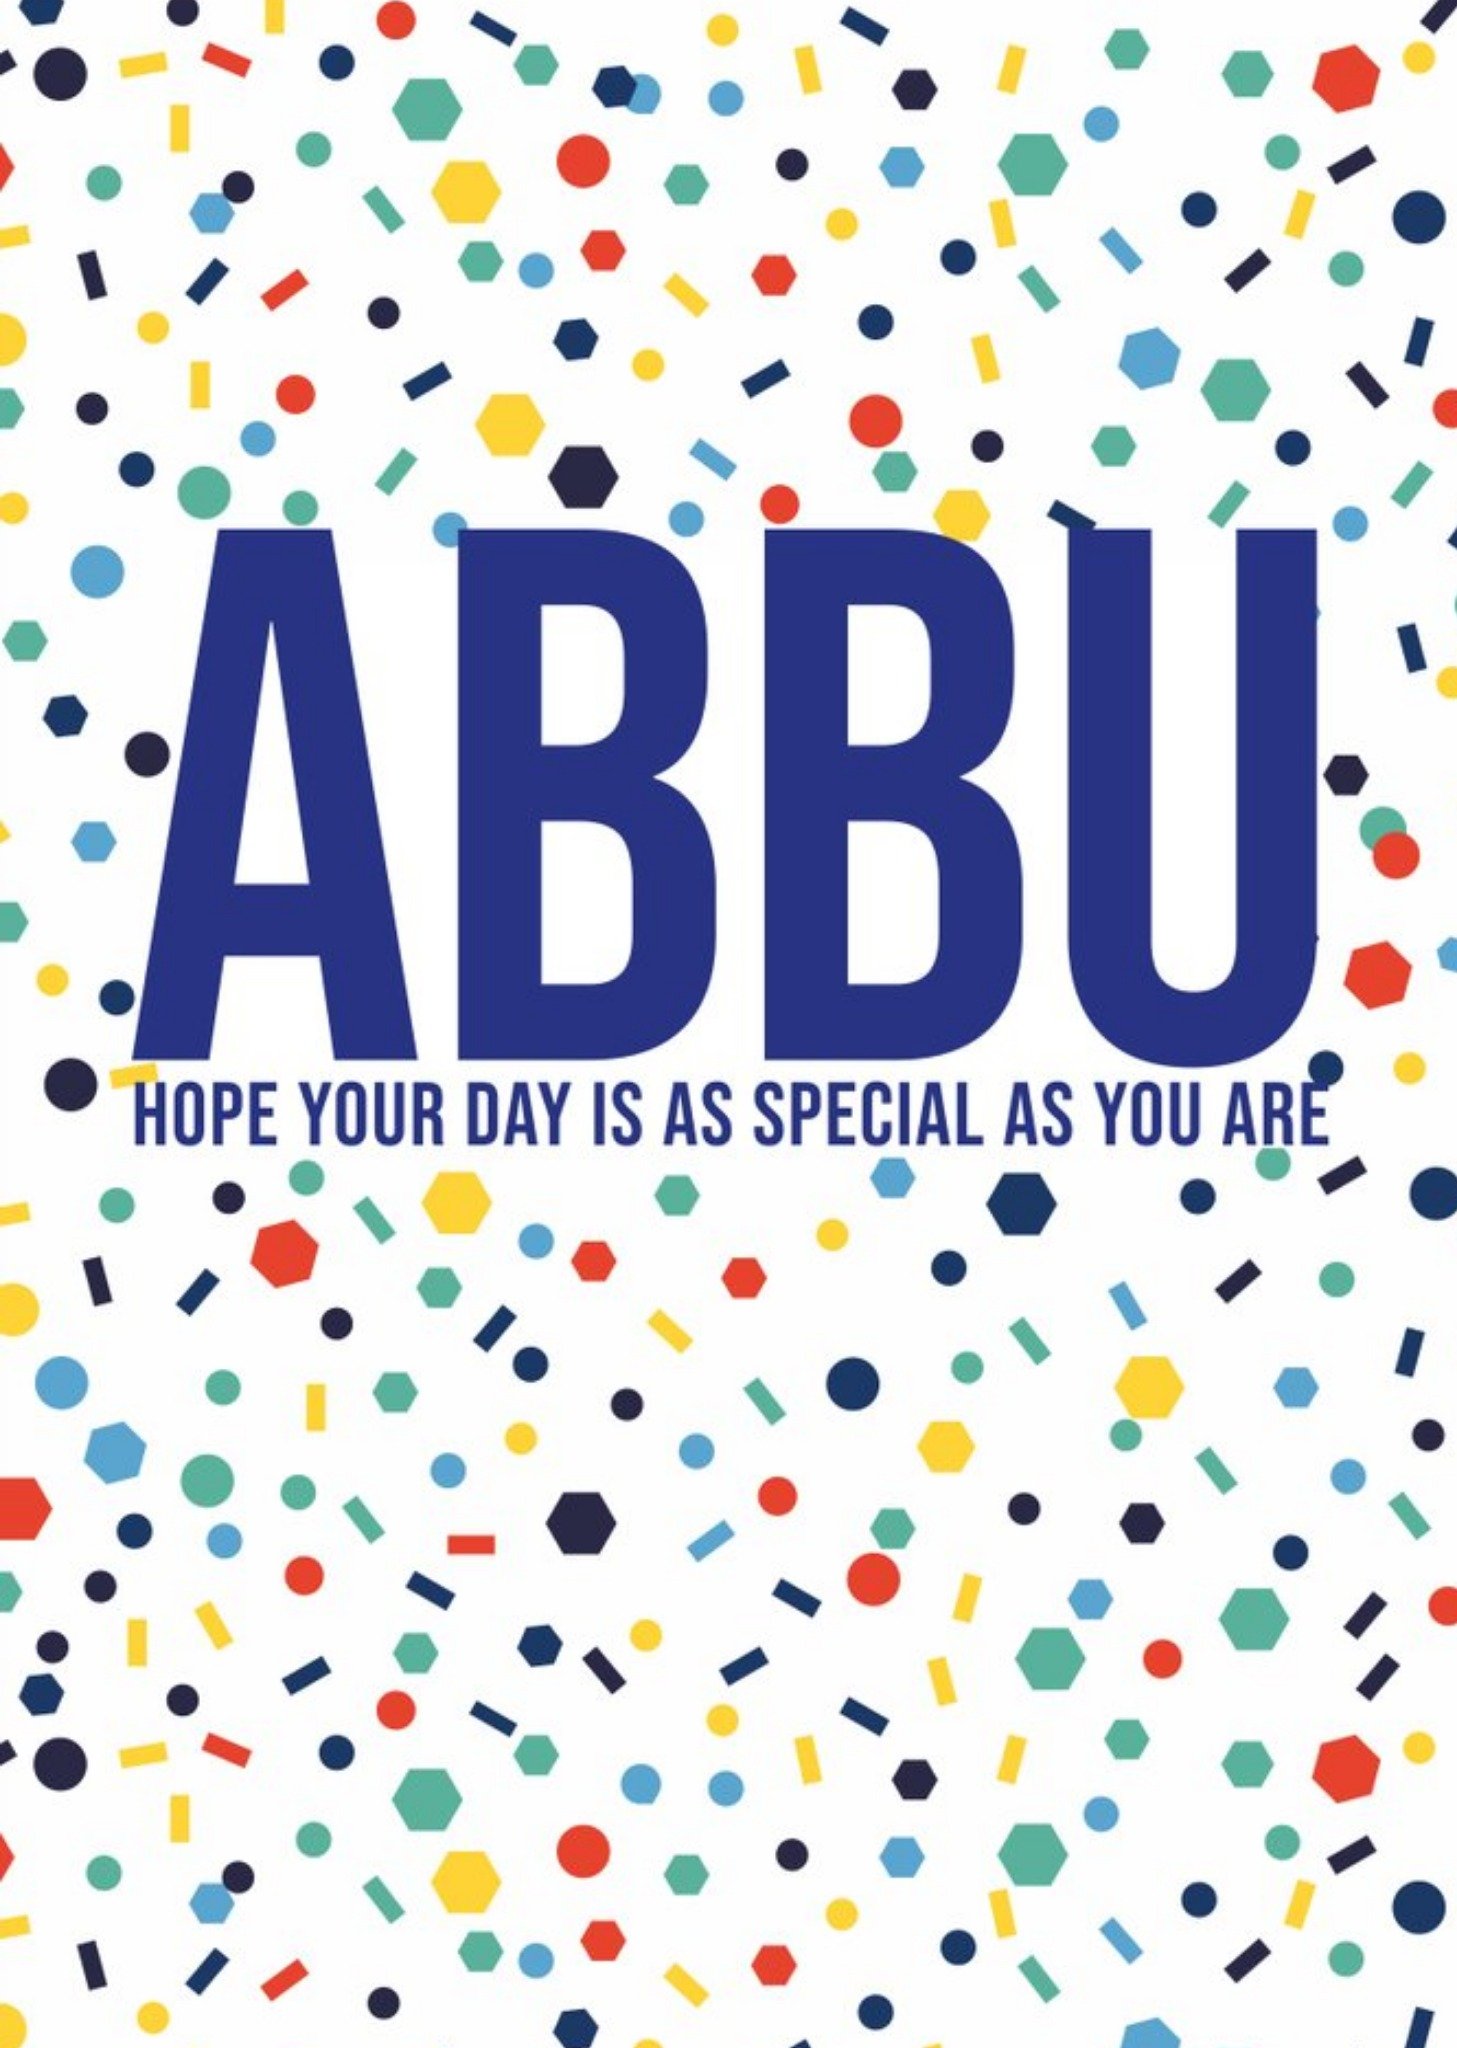 Eastern Print Studio Abbu Hope Your Day Is As Special As You Are Birthday Card, Large